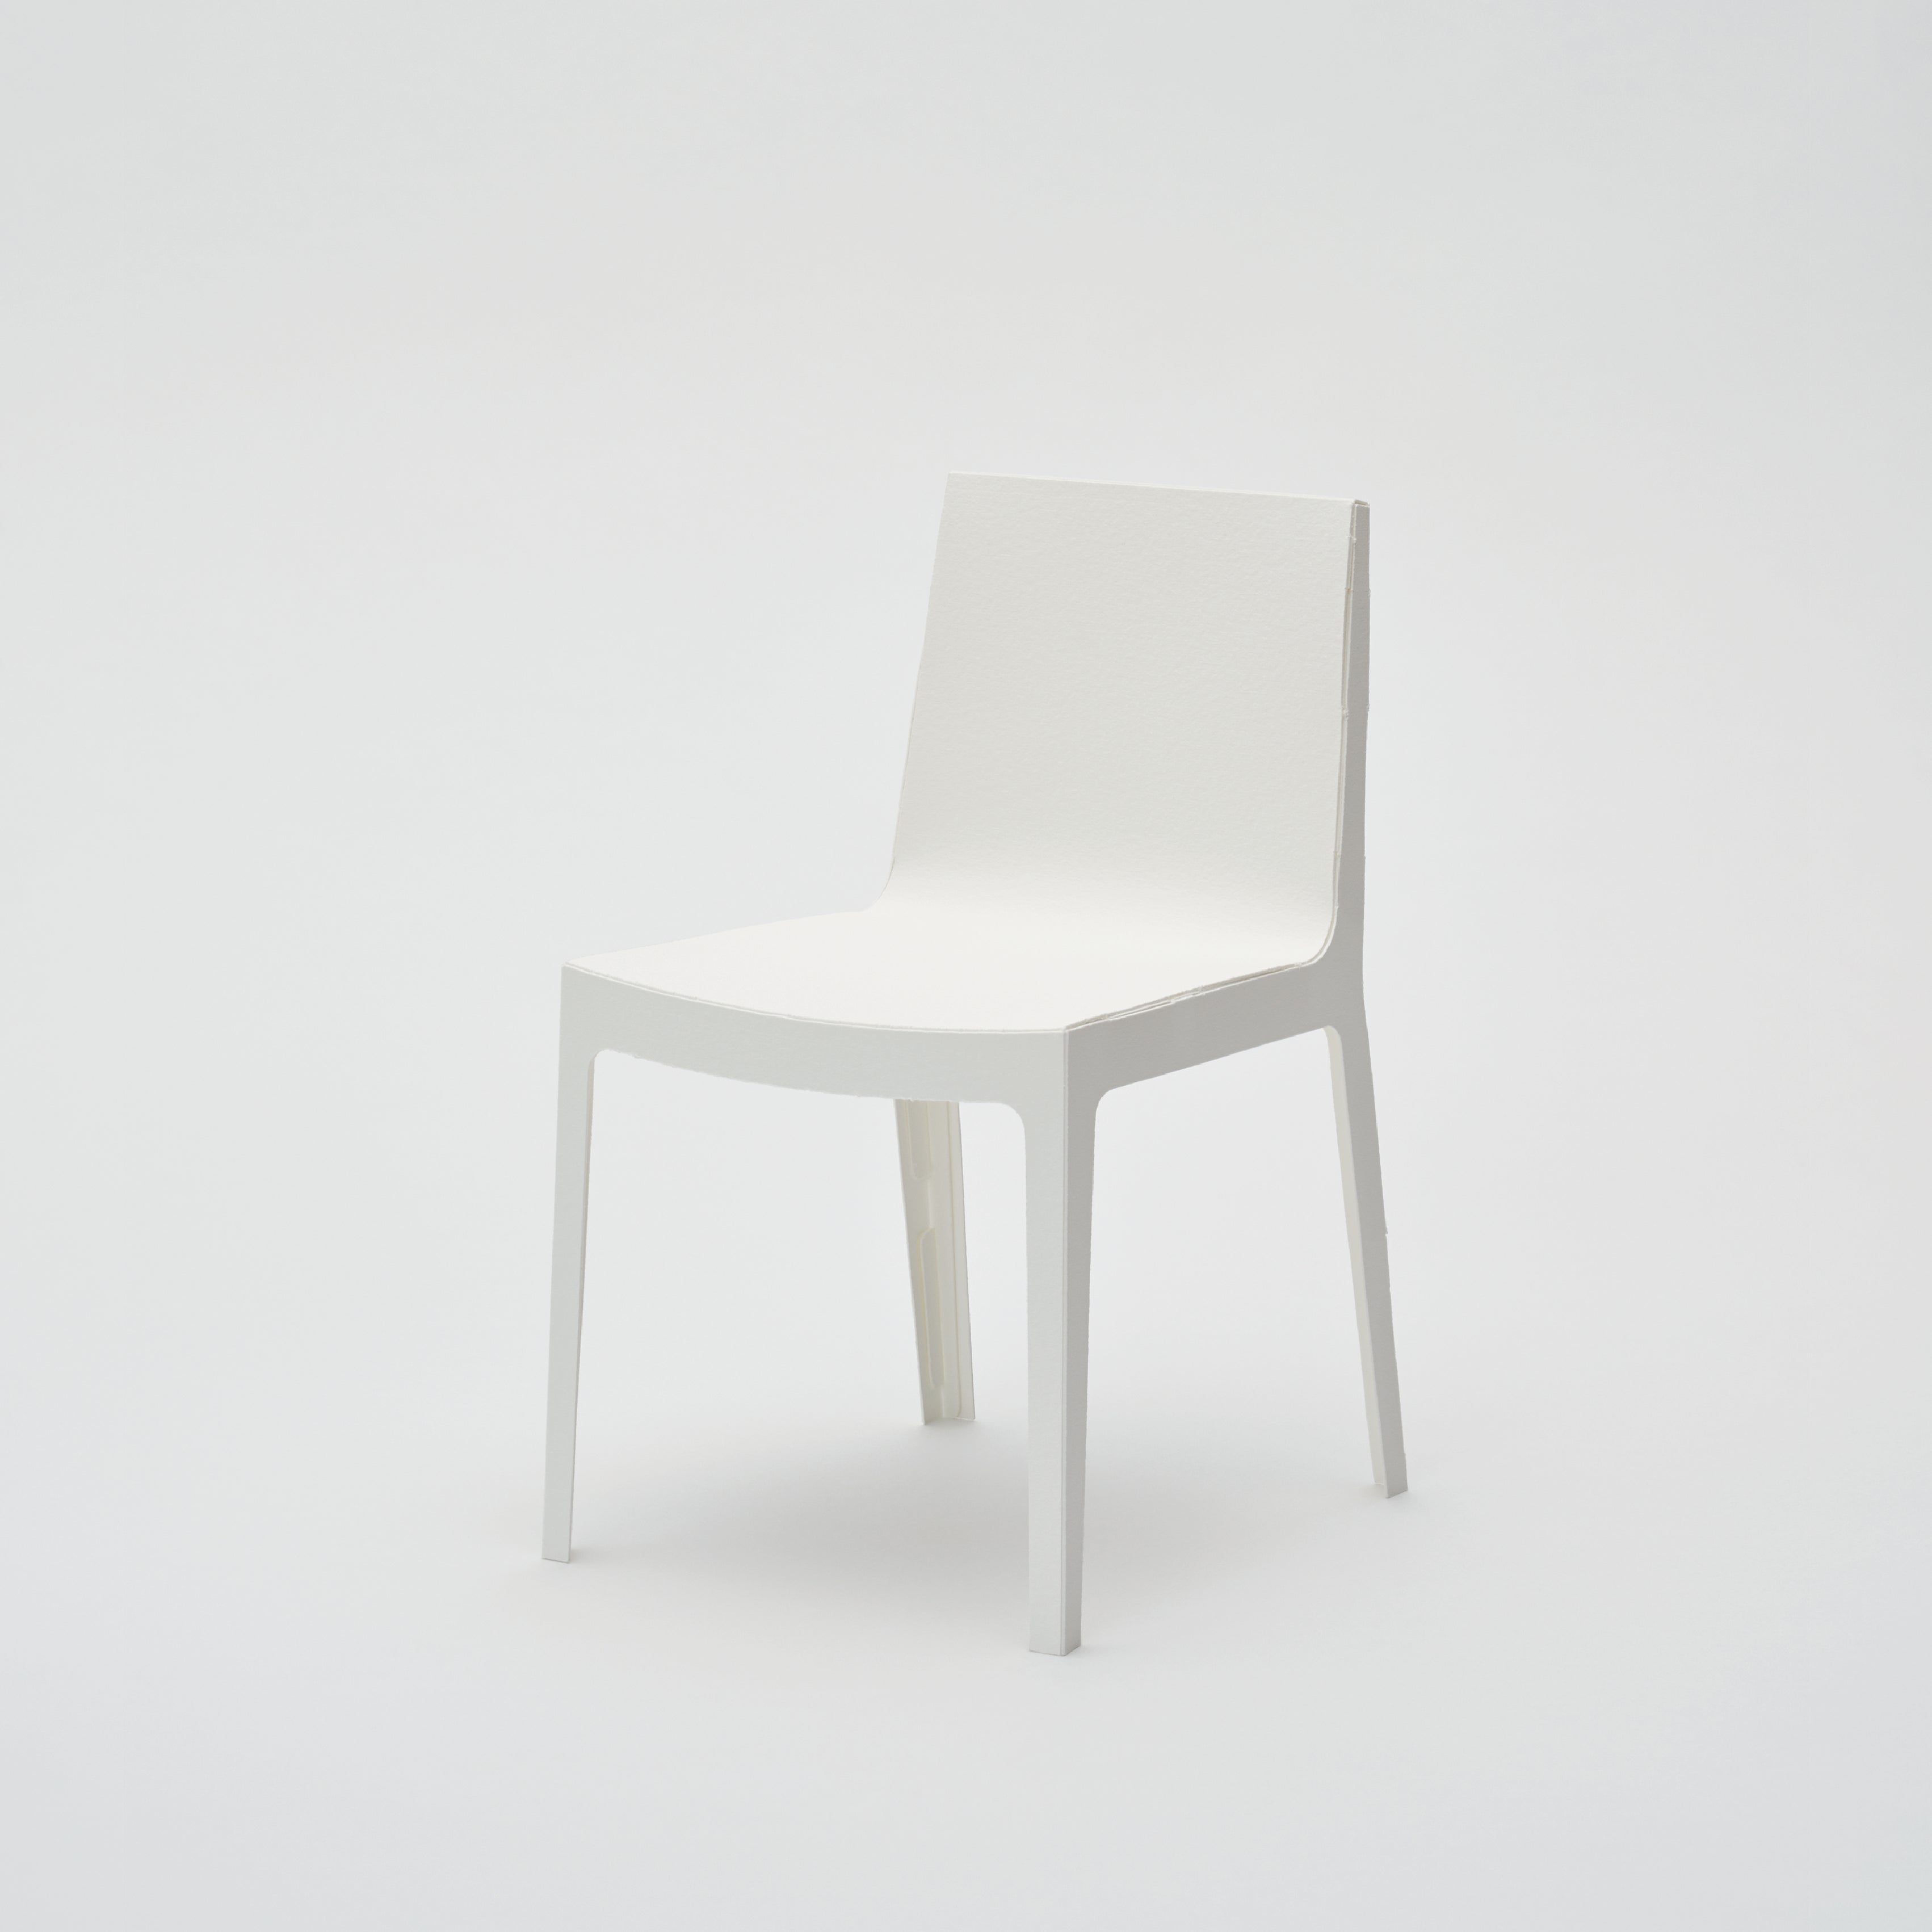 PAPER CHAIR No.01 CHAIR